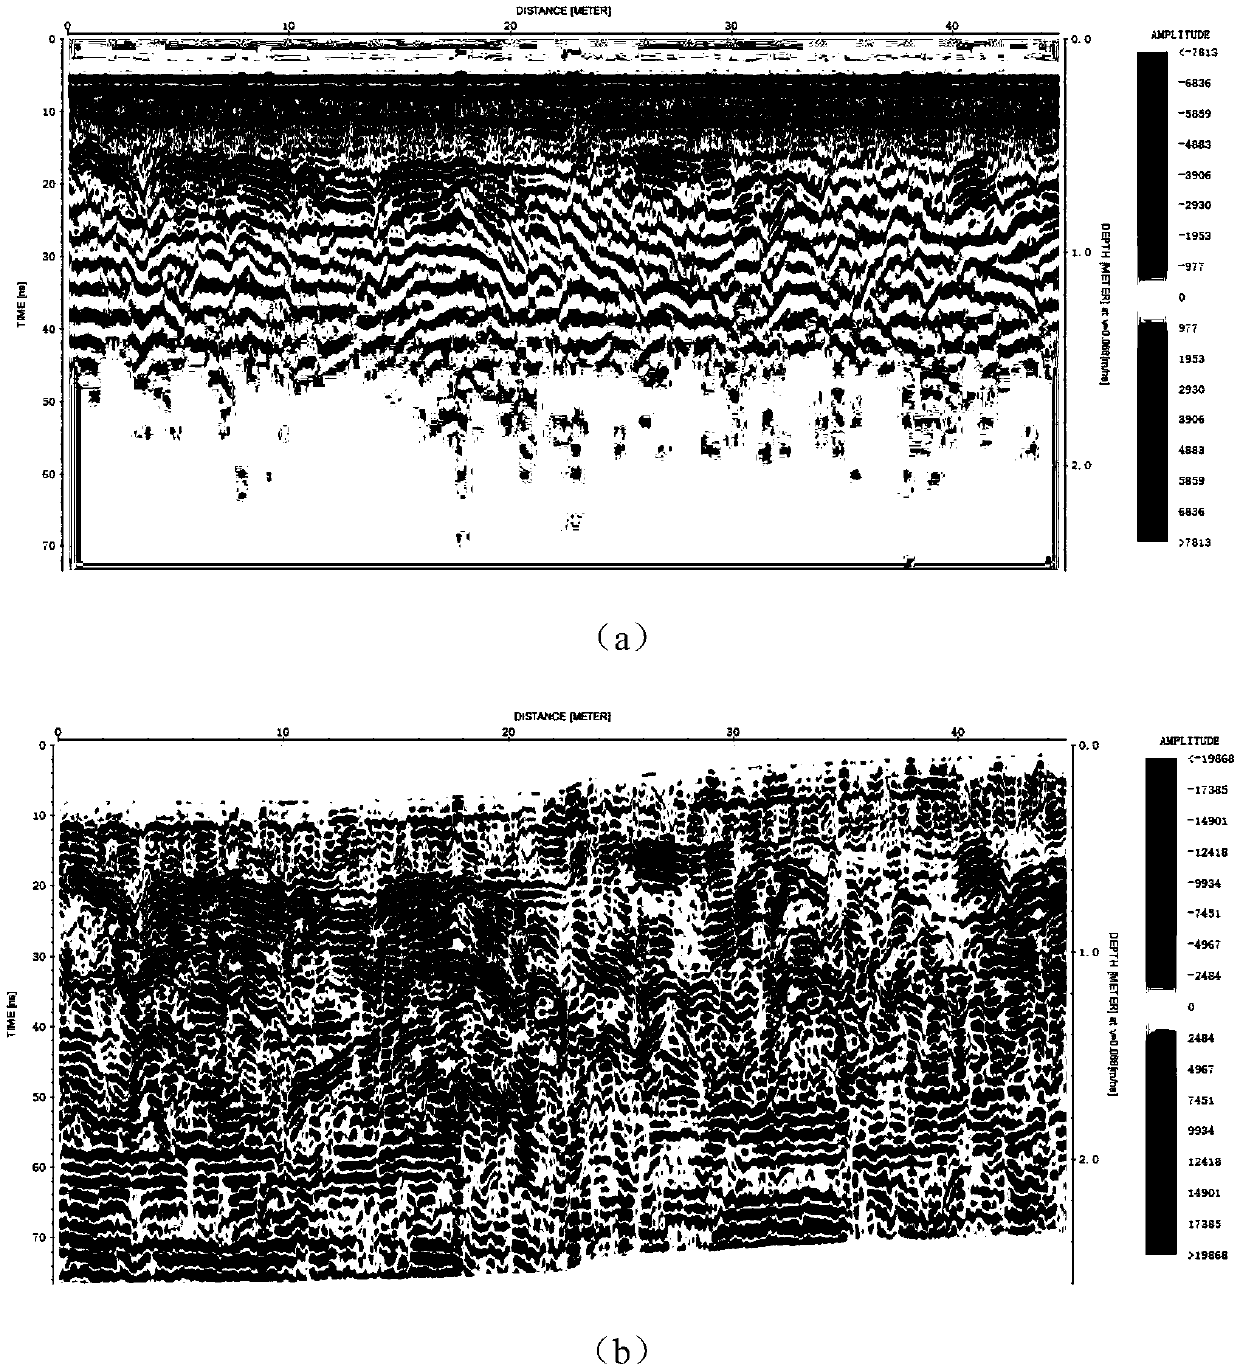 Ground-penetrating-radar-based active fault shallow ground surface spatial distribution detection method